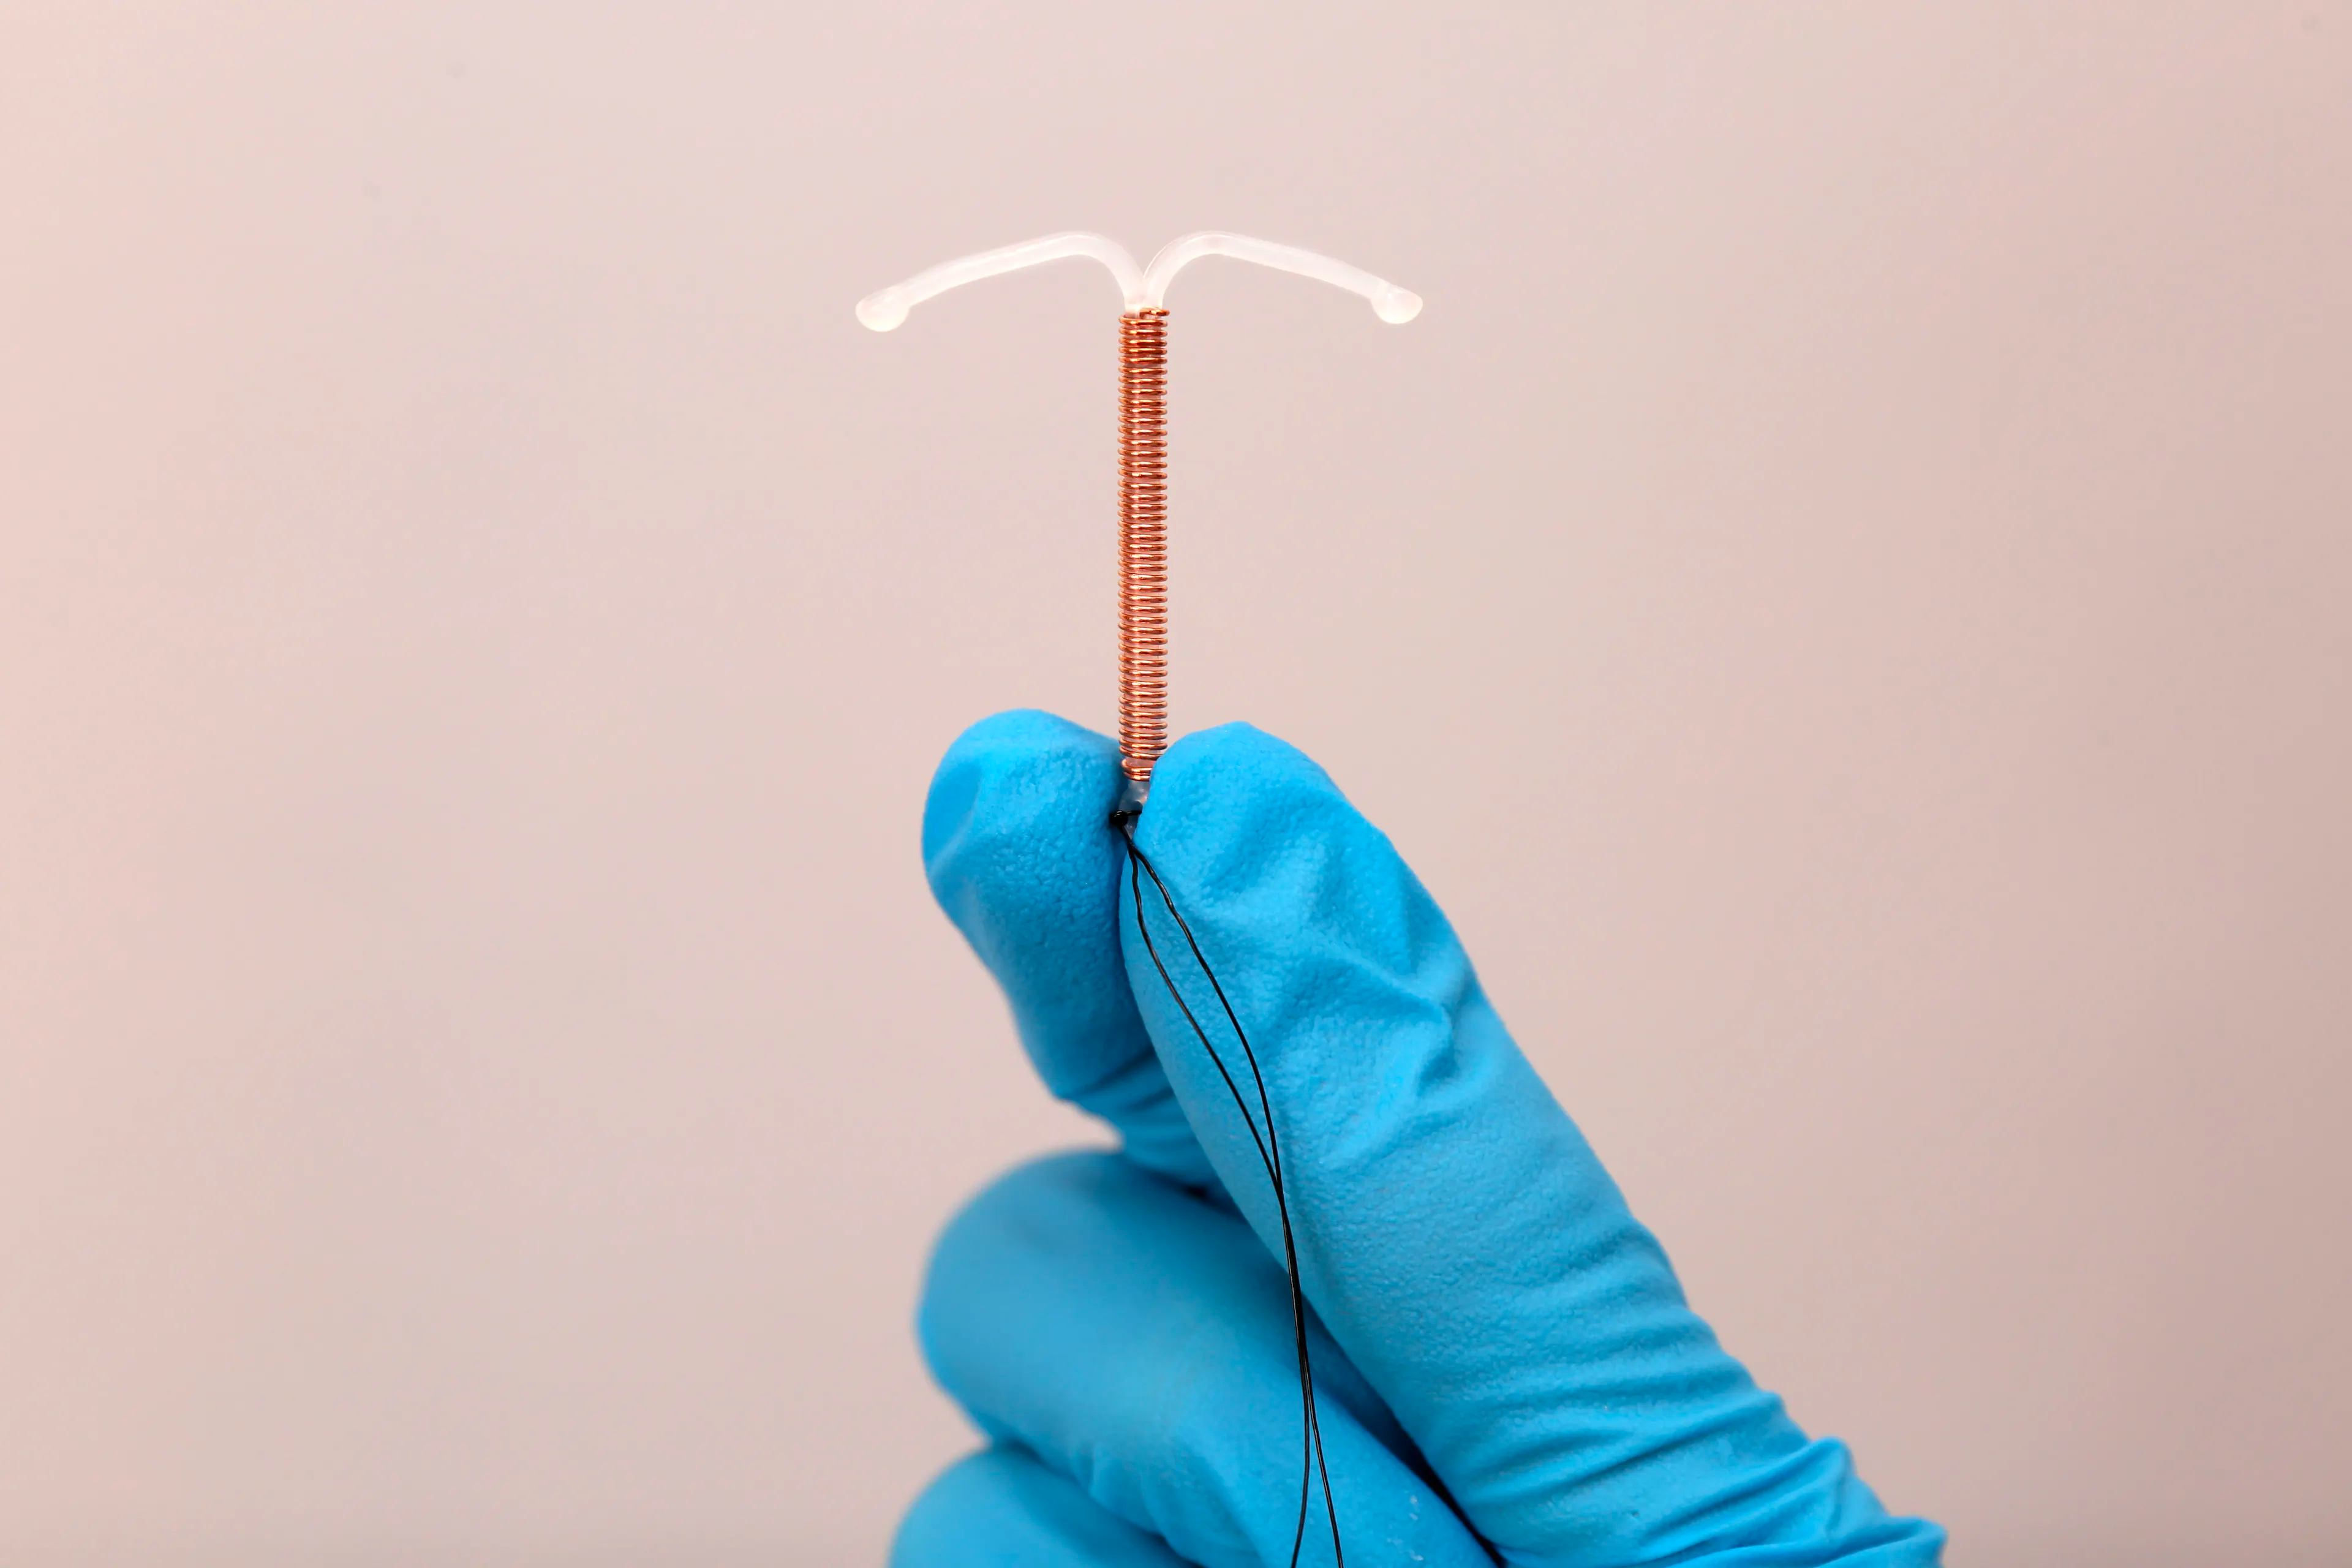 Long-acting reversible contraception access for a Southern Texas border population | Image Credit: © New Africa - © New Africa - stock.adobe.com.